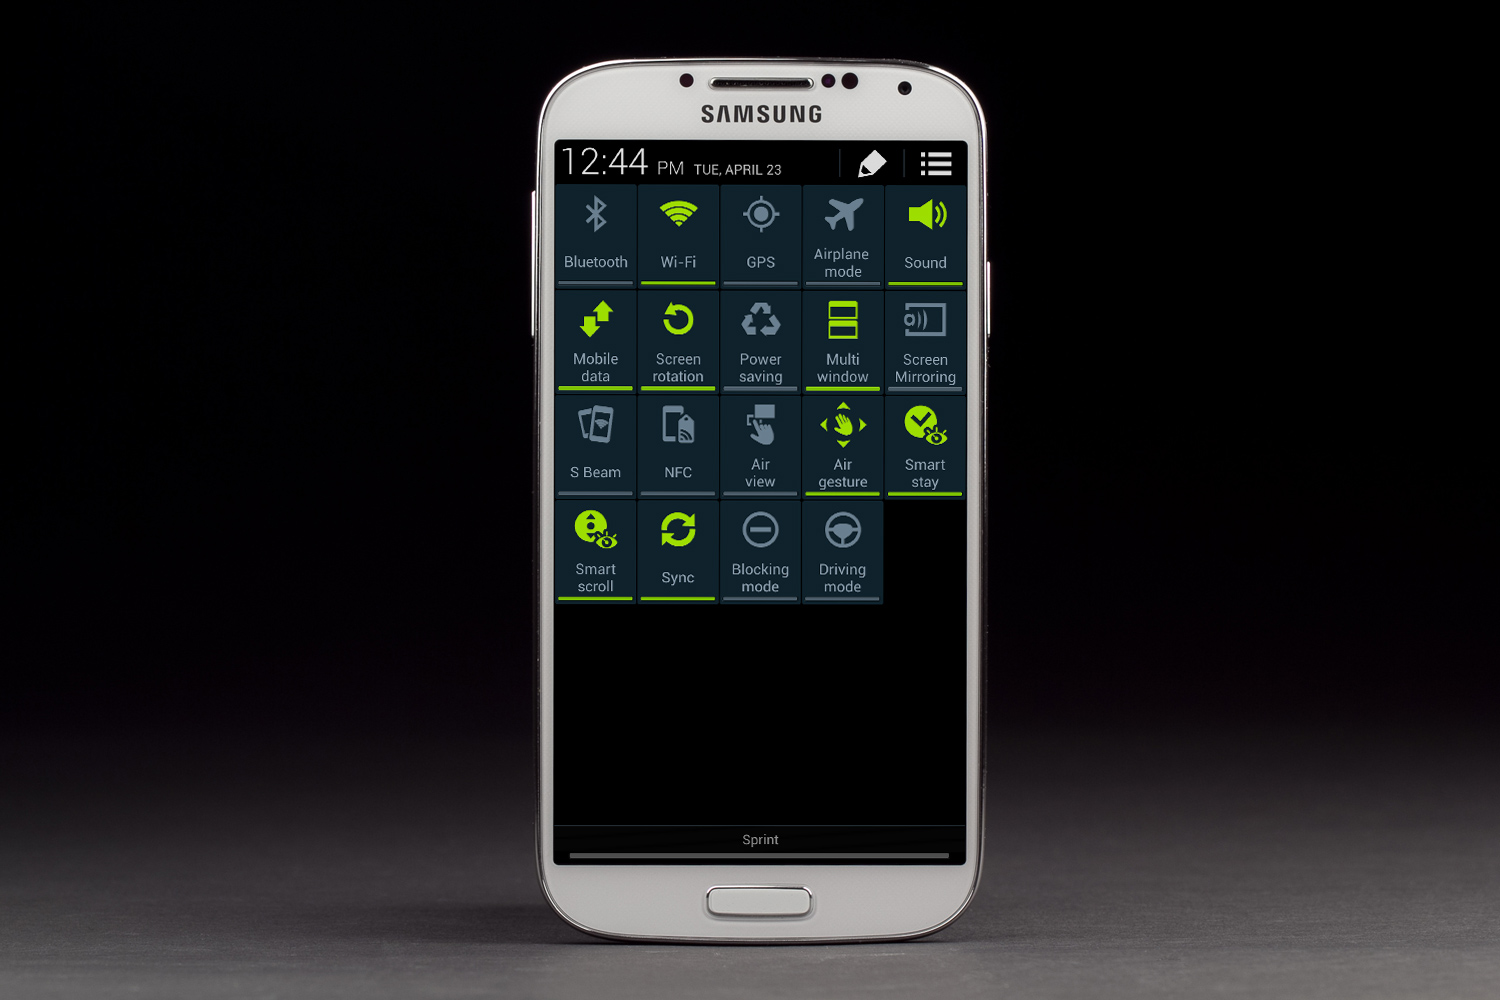 10 Best Samsung Galaxy S4 Features You Might Not Know About